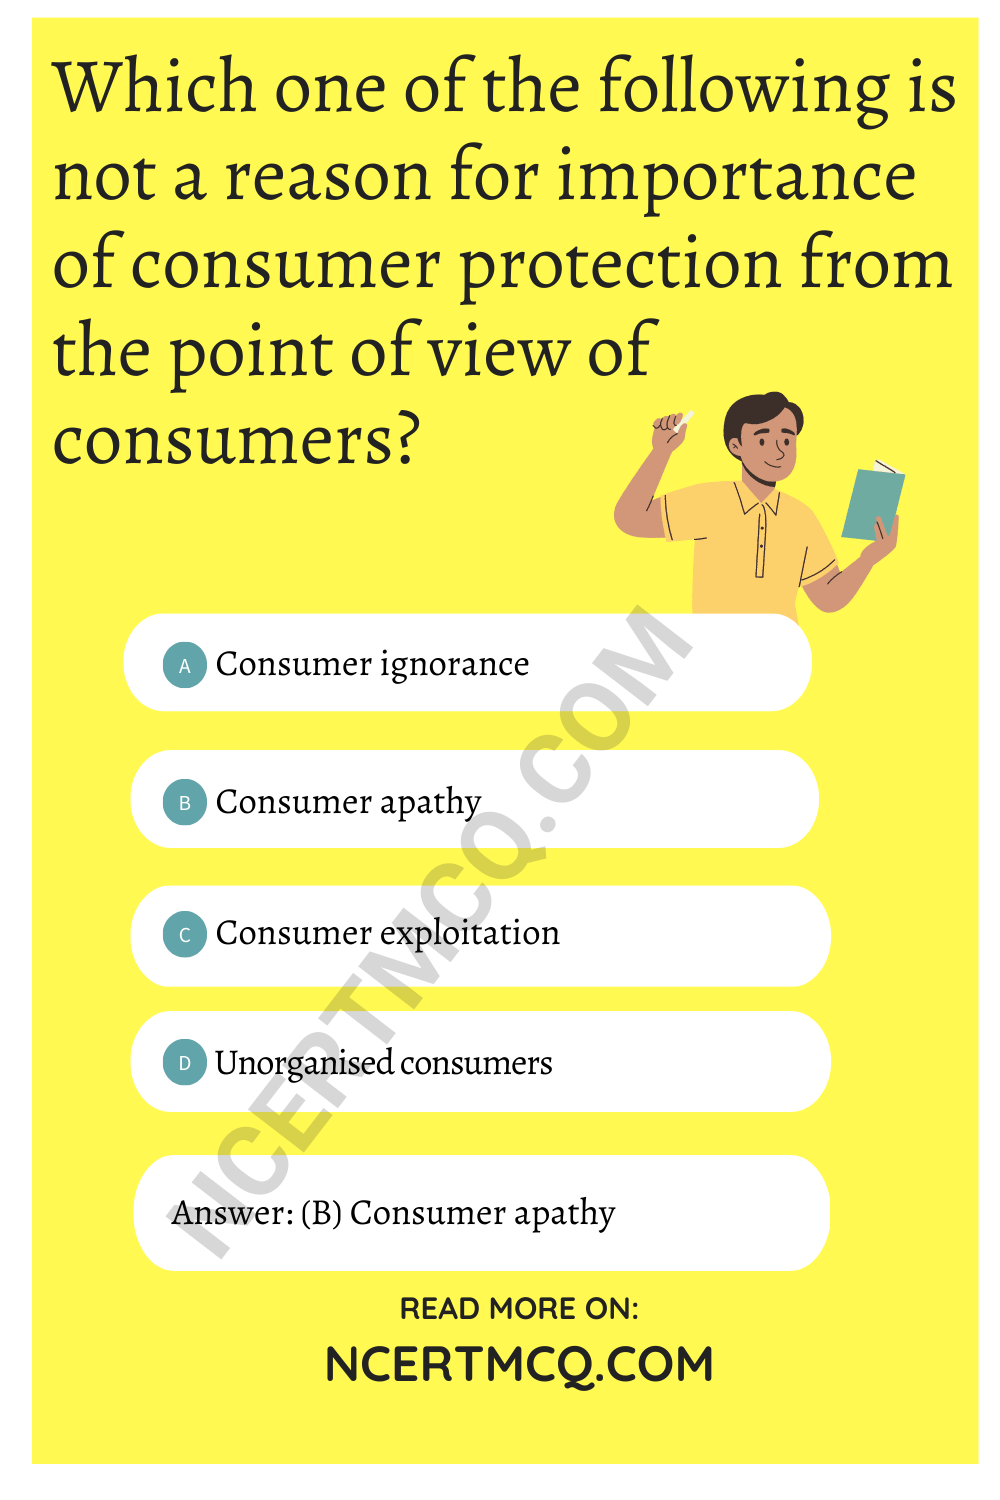 Which one of the following is not a reason for importance of consumer protection from the point of view of consumers?